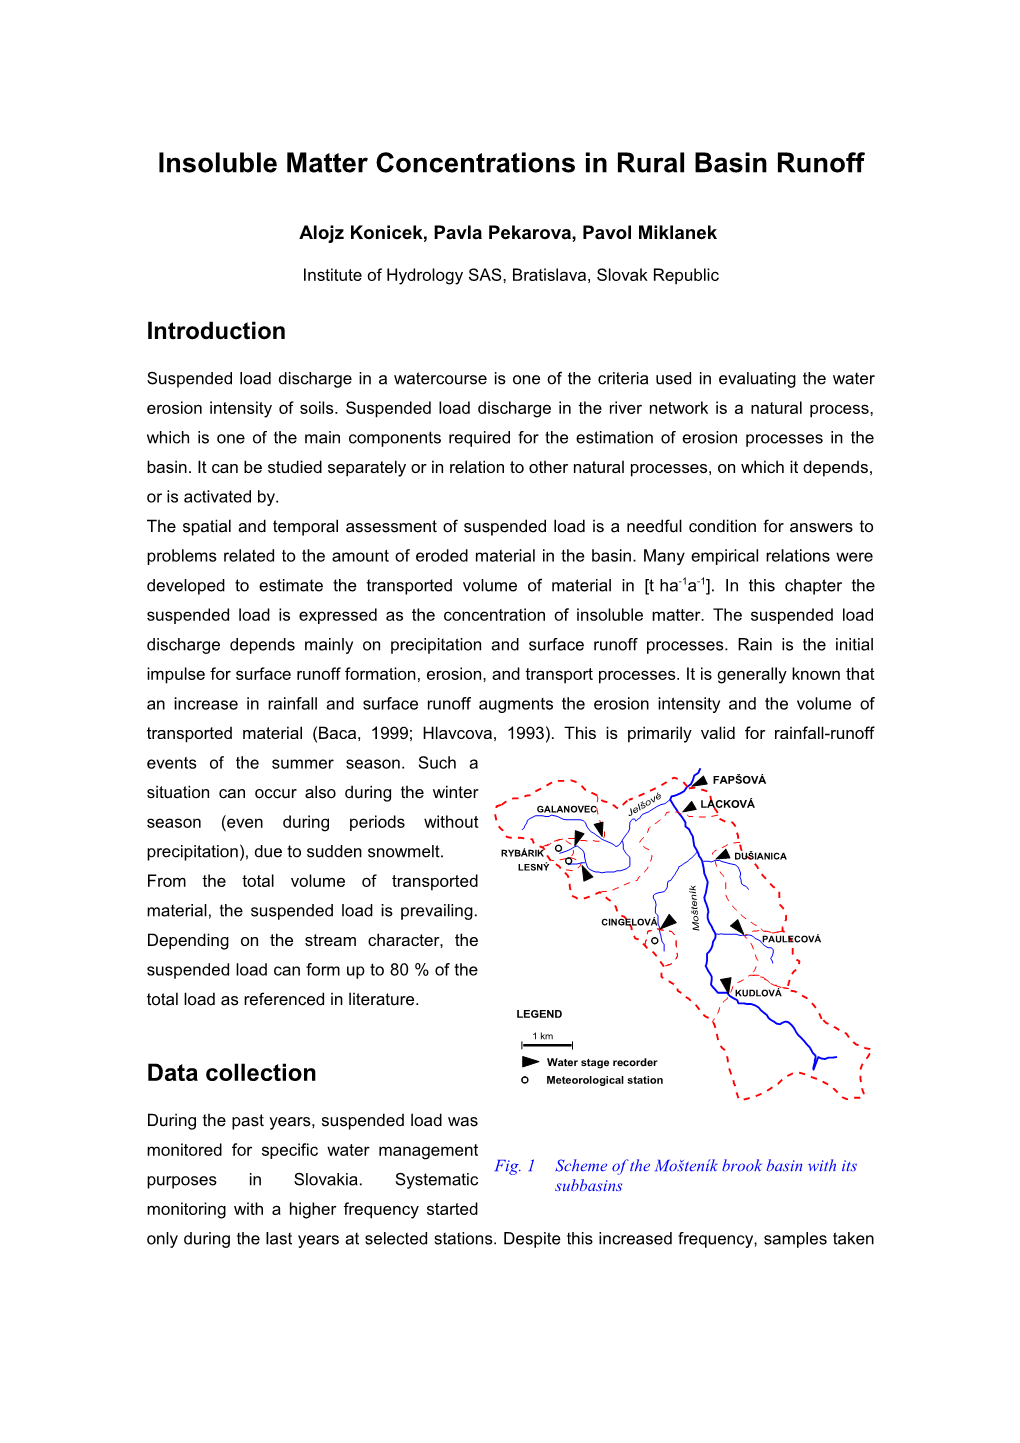 Insoluble Matter Concentrations in Rural Basin Runoff